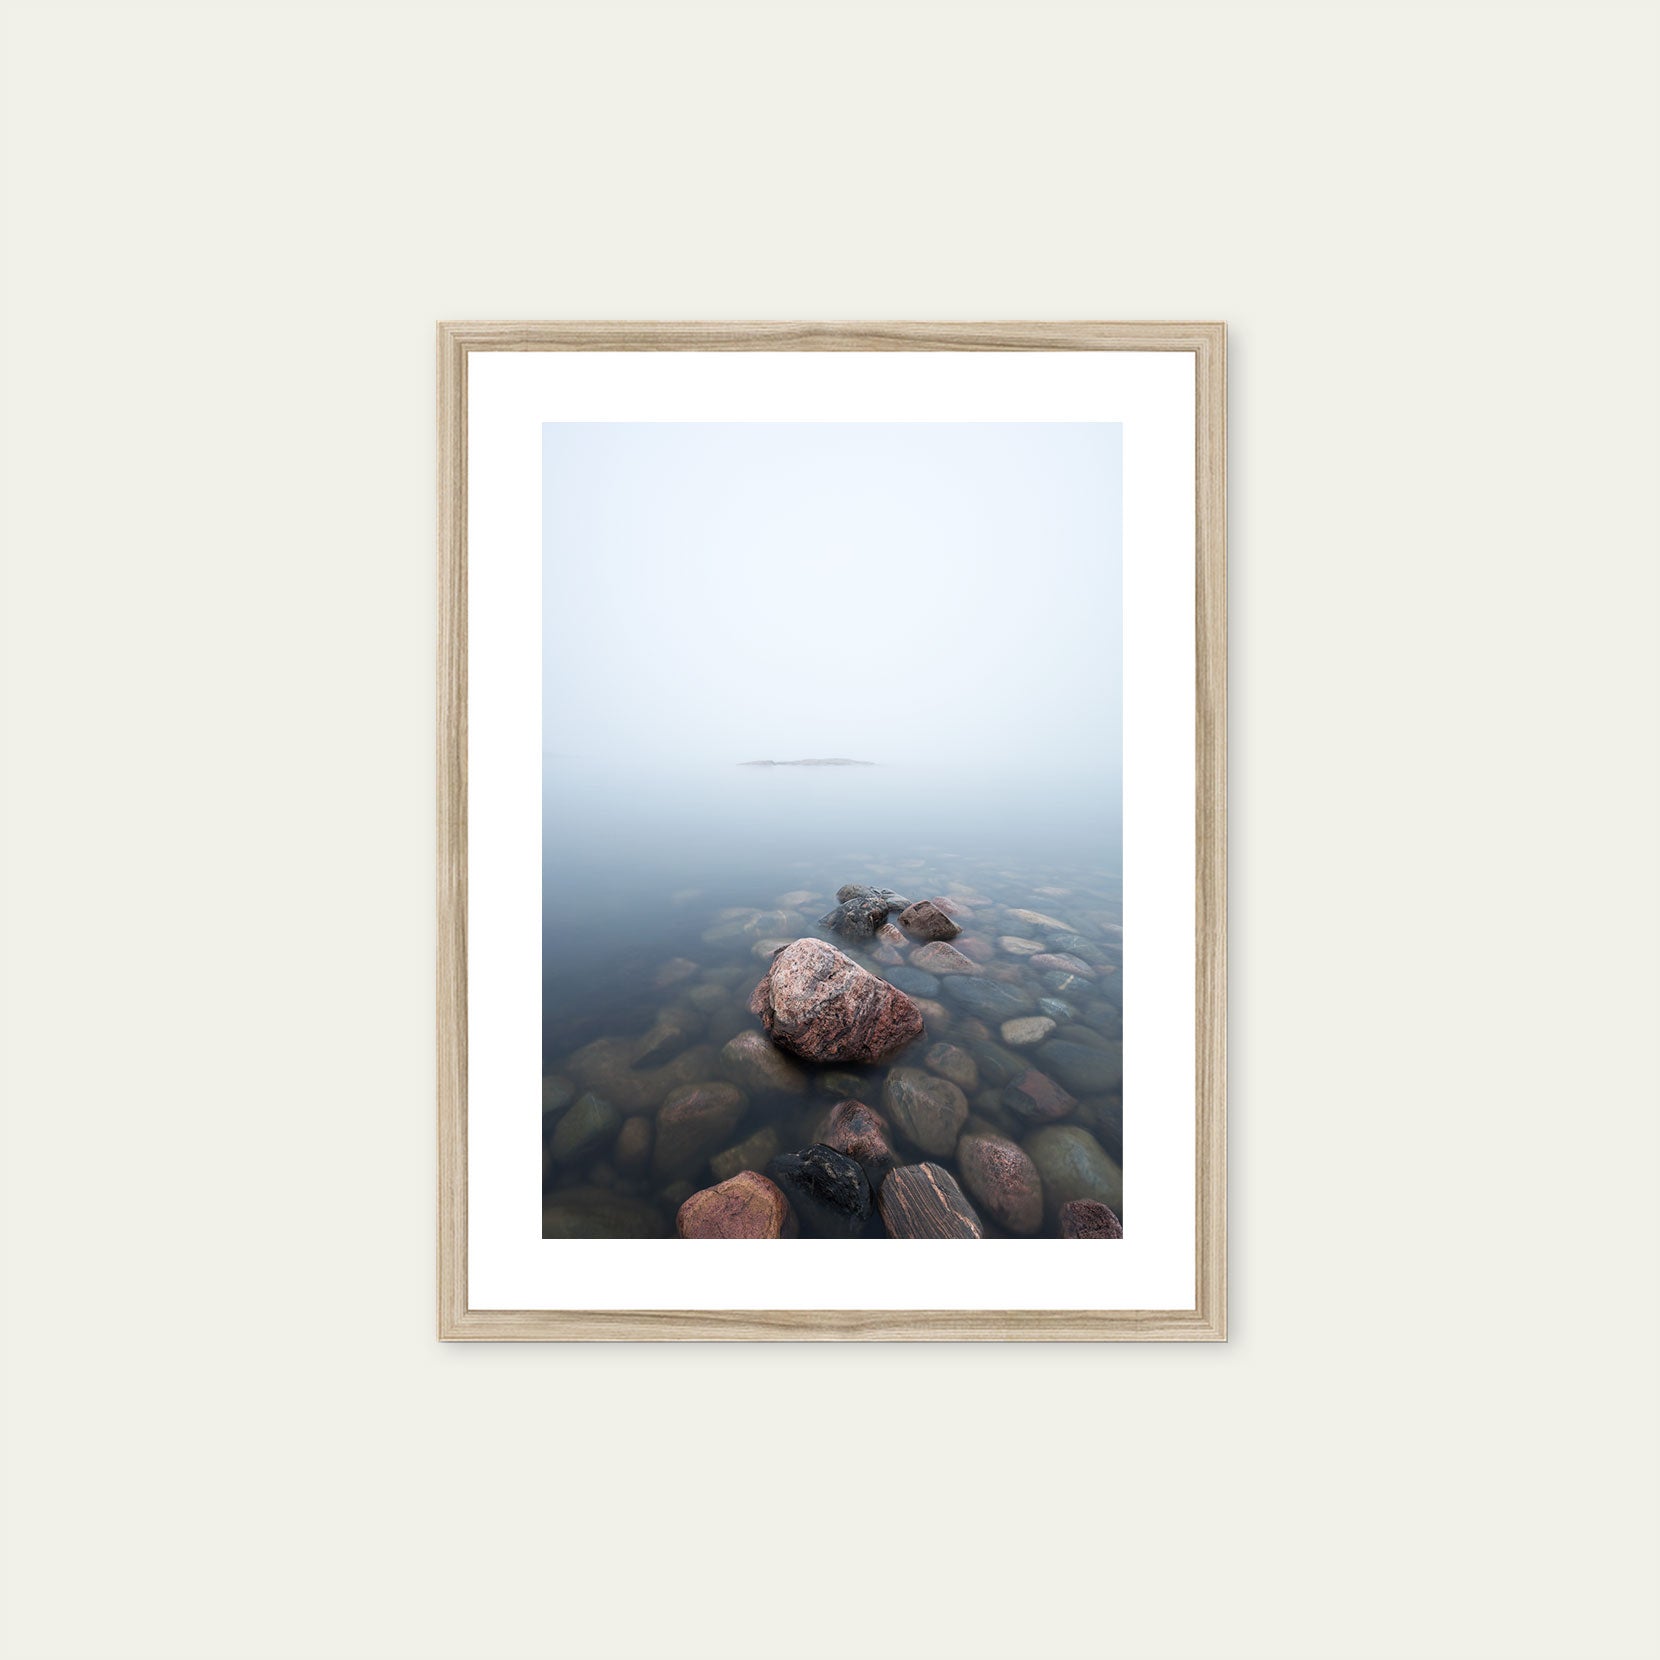 A wood framed print of rocks in the sea on a foggy day